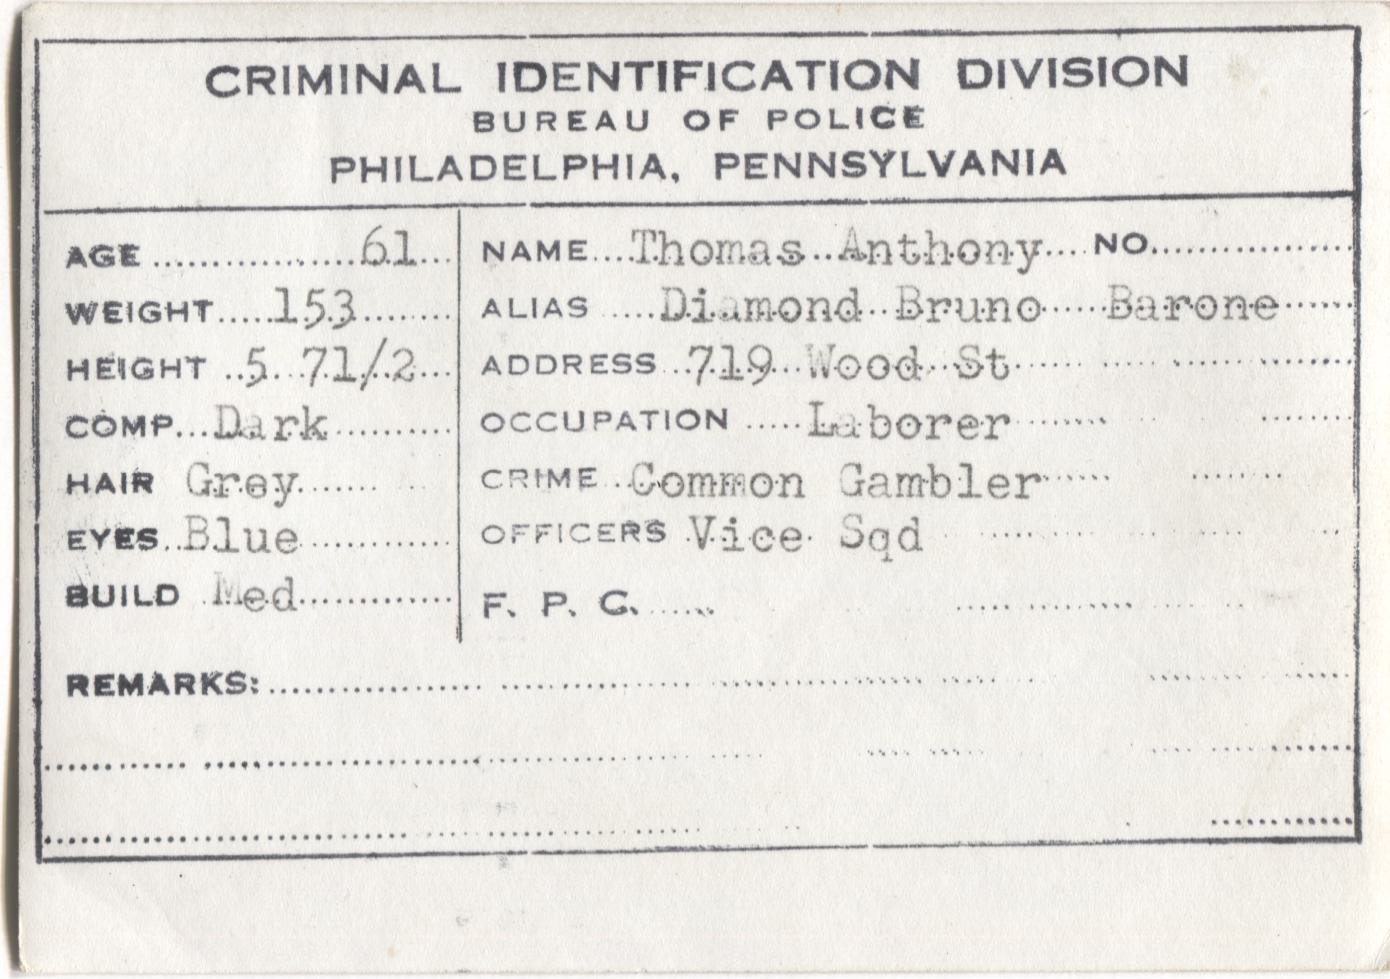 Thomas Anthony Mugshot - Arrested on 4/9/1948 for Being a Common Gambler